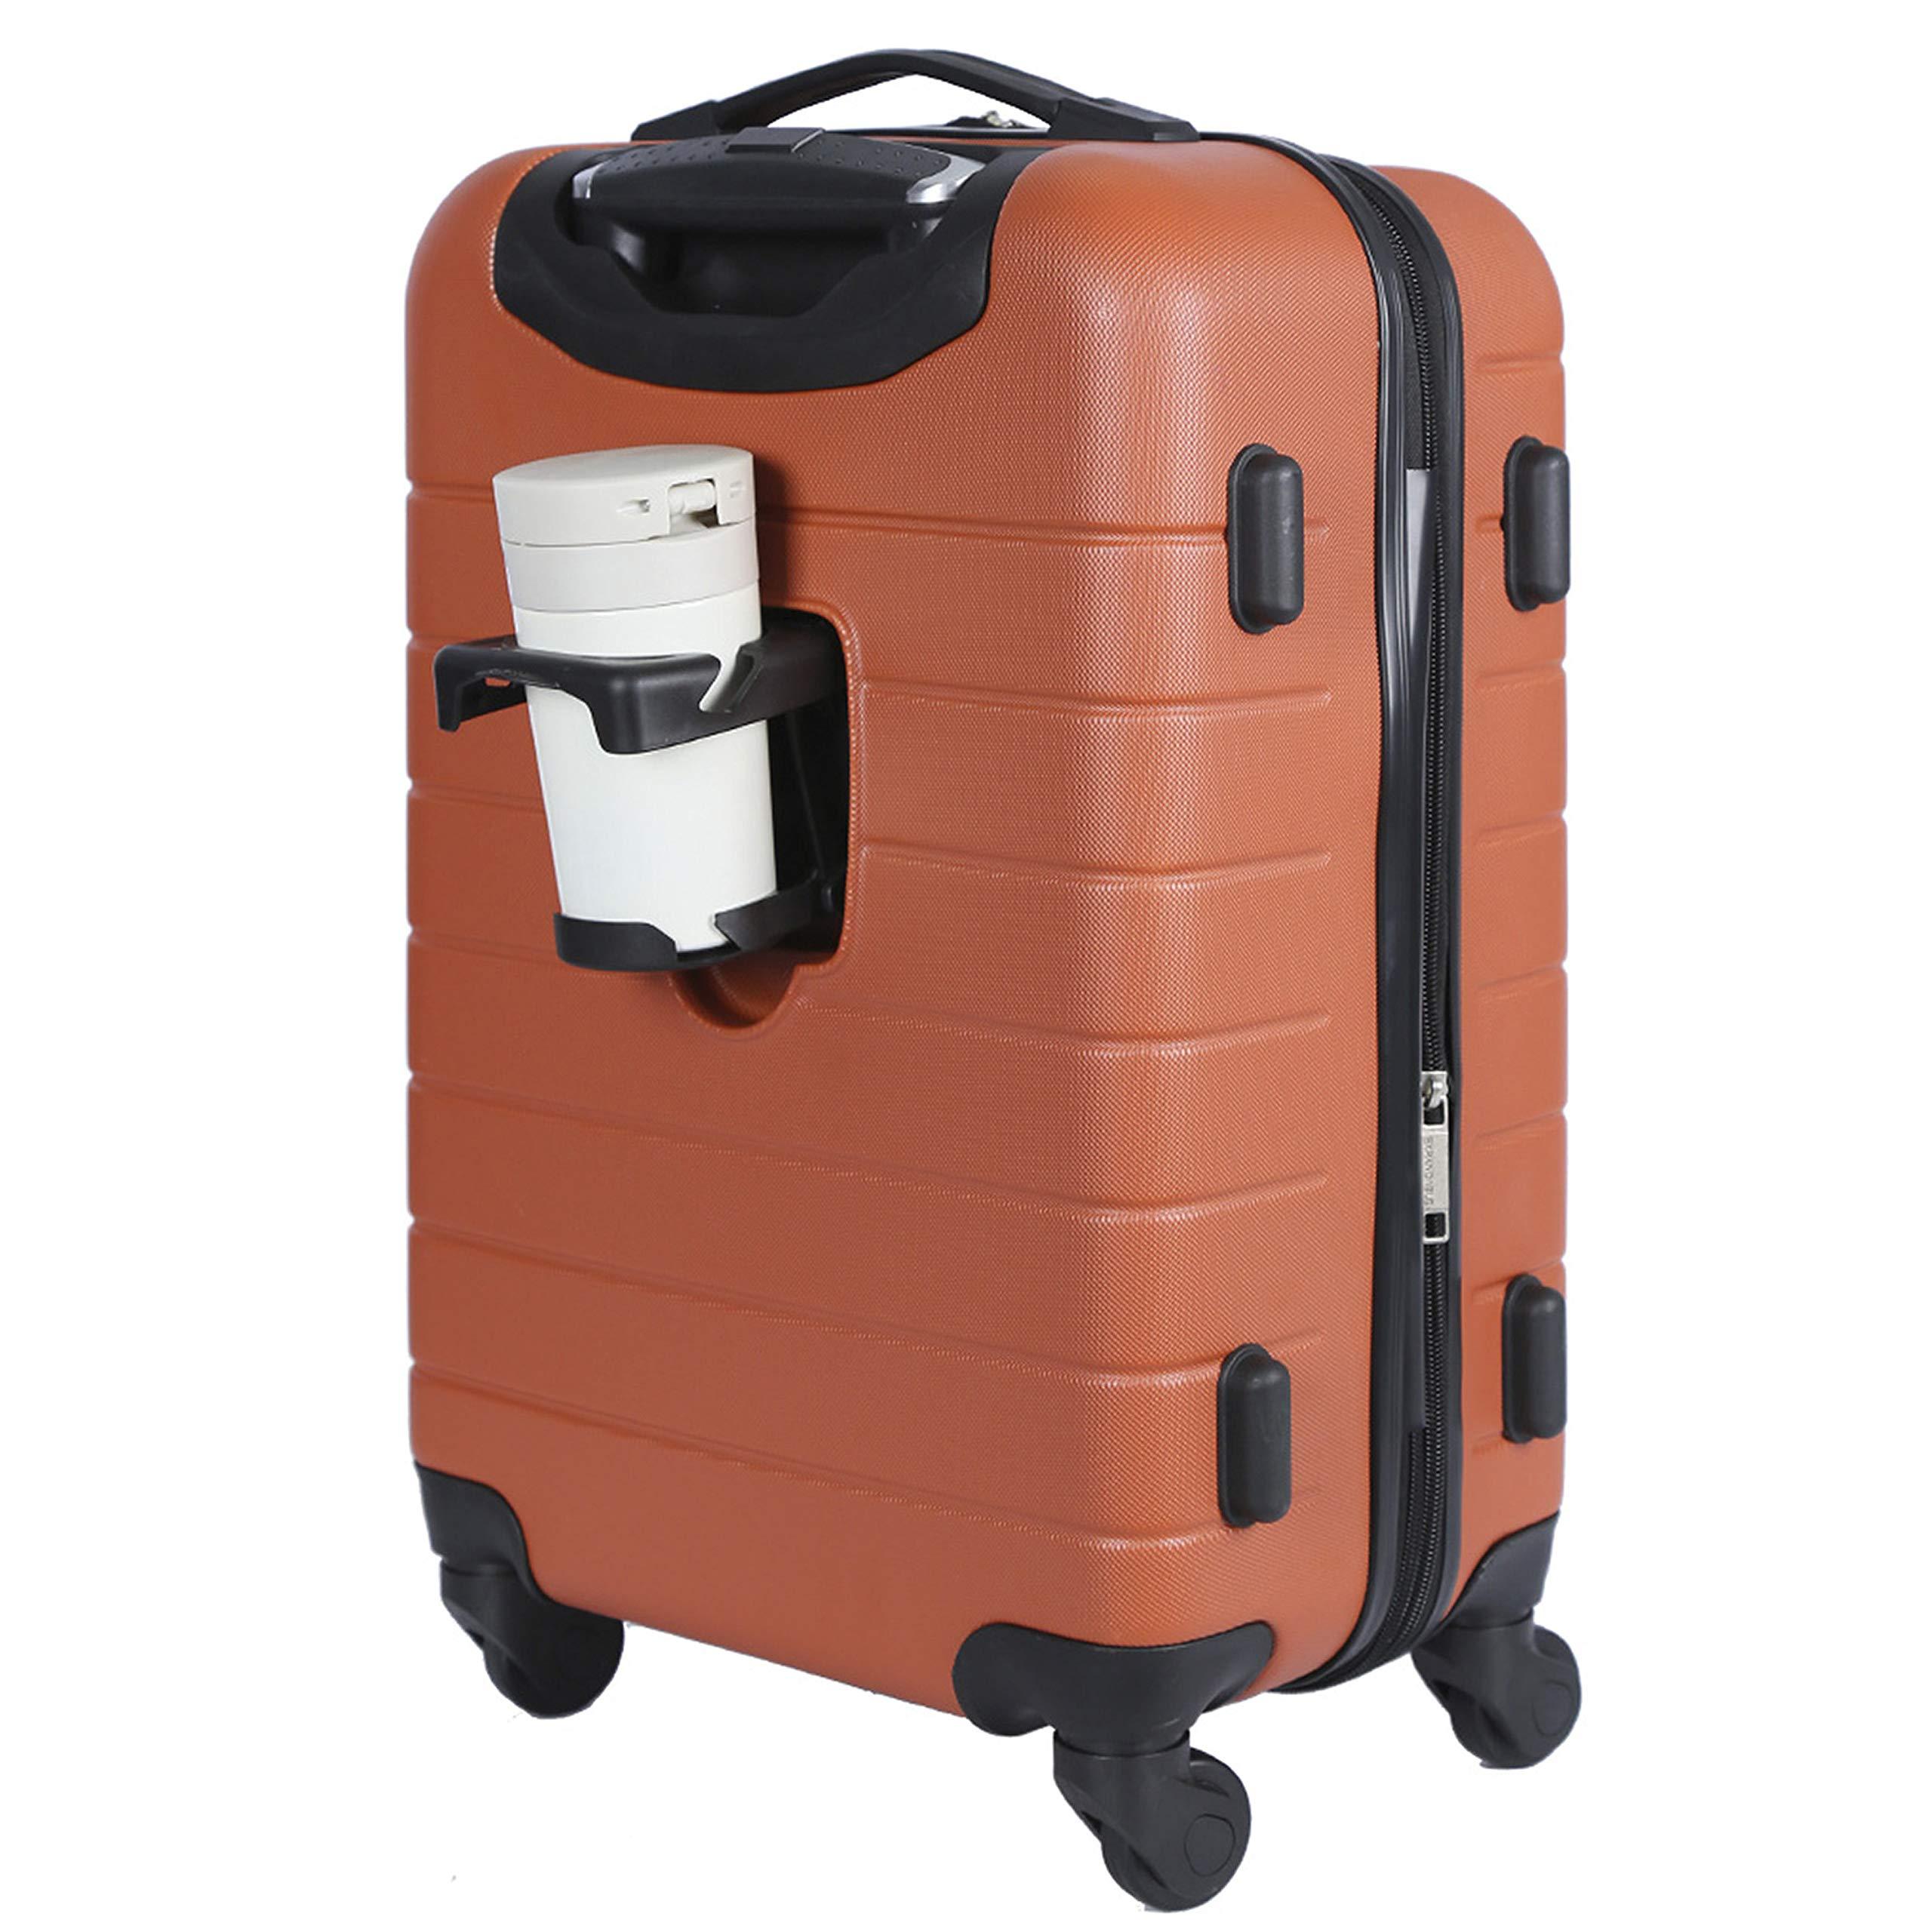 Wrangler Smart Luggage Set With Cup Holder And Usb Port | Lyst UK